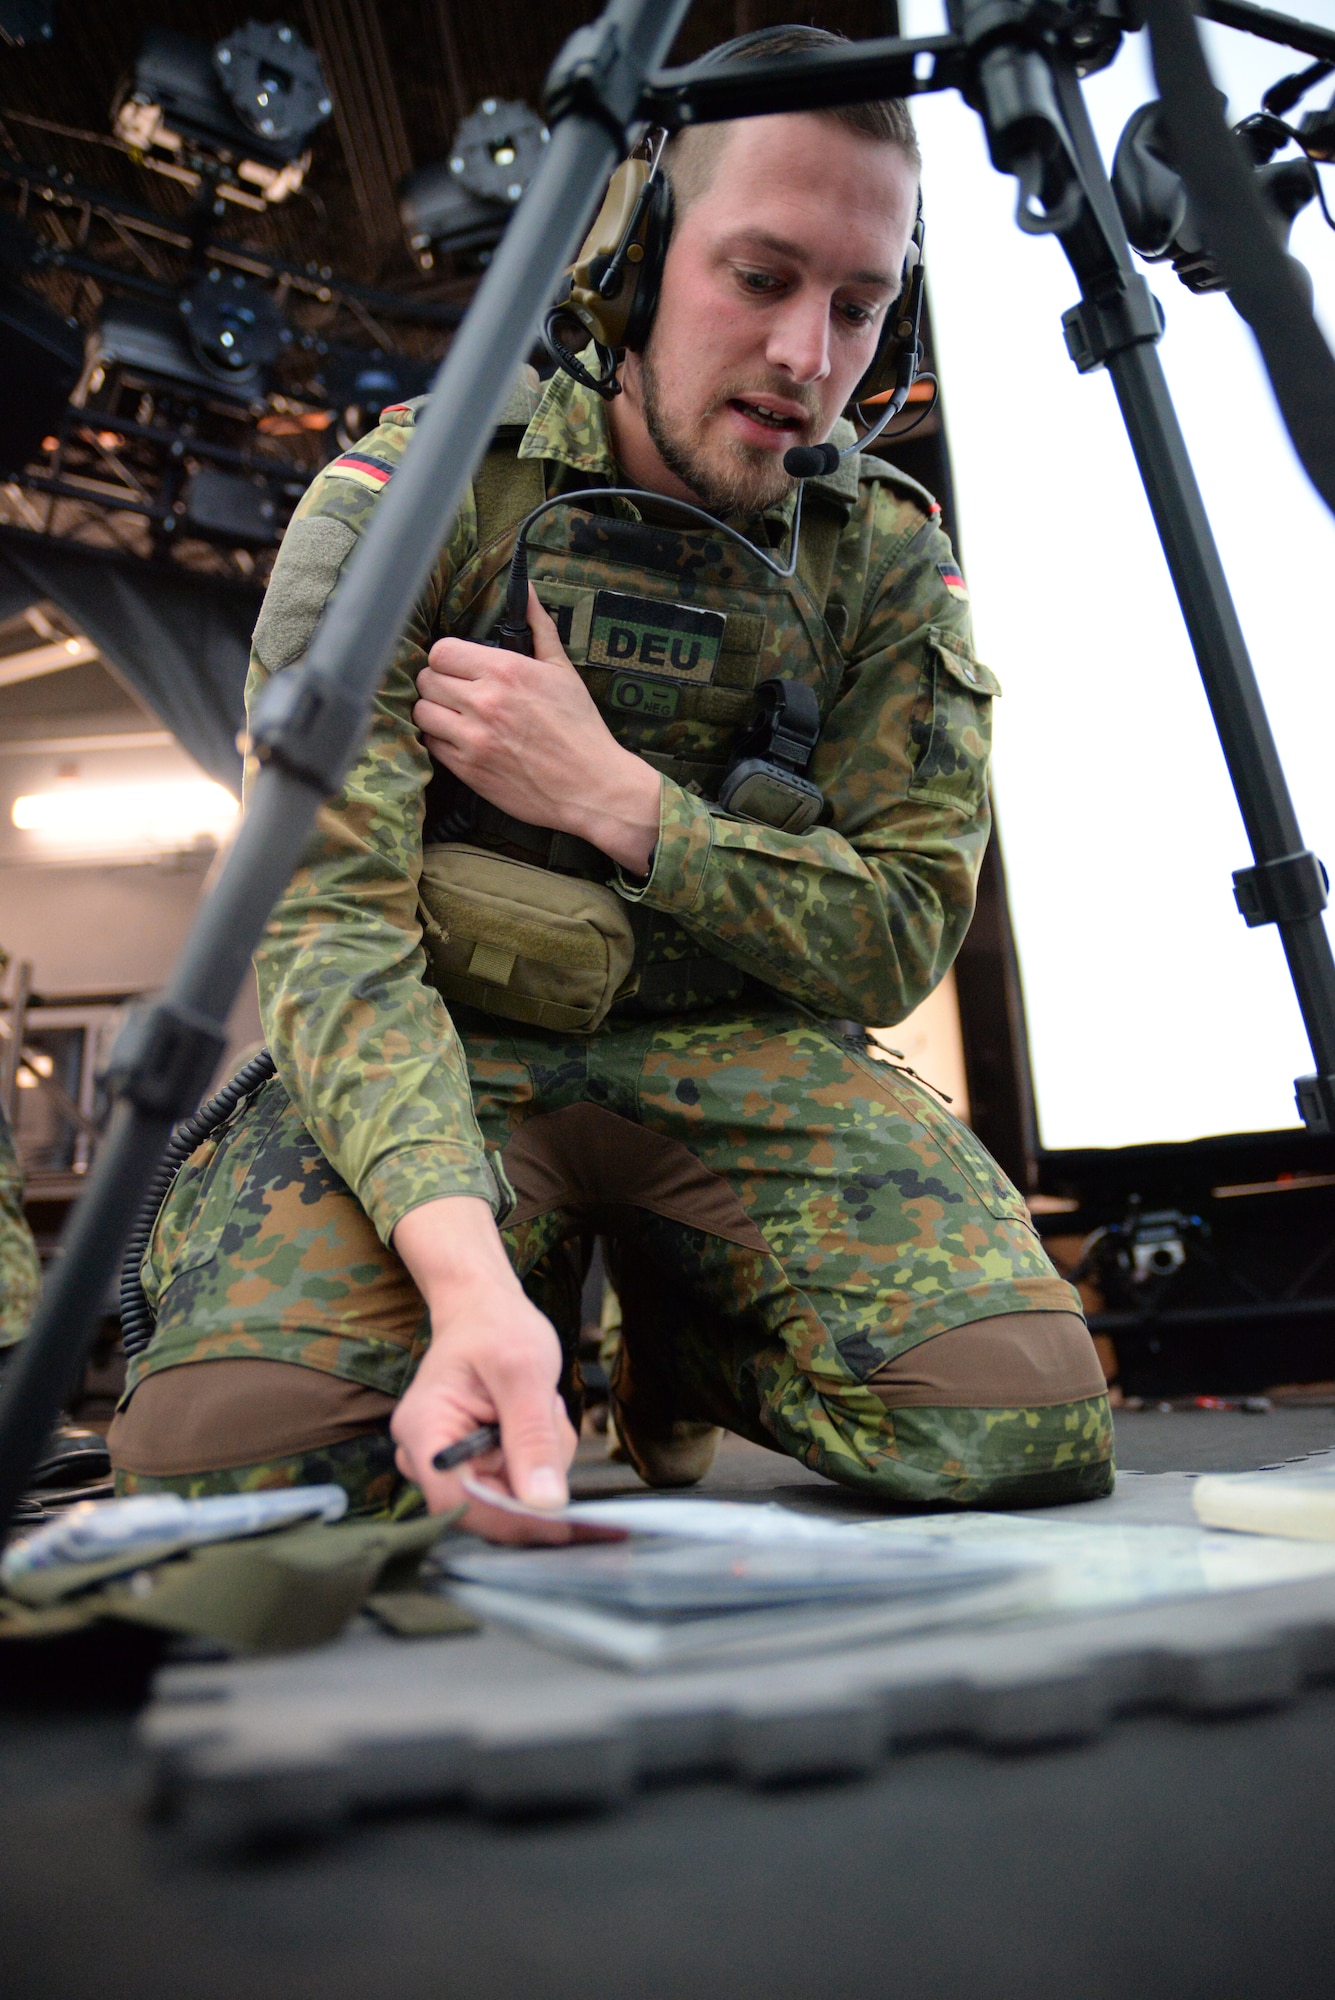 A picture of German armed forces Capt. Tim Jantzen, Joint Terminal Attack Controller (JTAC) with the 131st Artillery Battalion in Weiden, Germany, training in the 227th Air Support Operations Squadron's $1.2 million Air National Guard Advanced JTAC Training System.